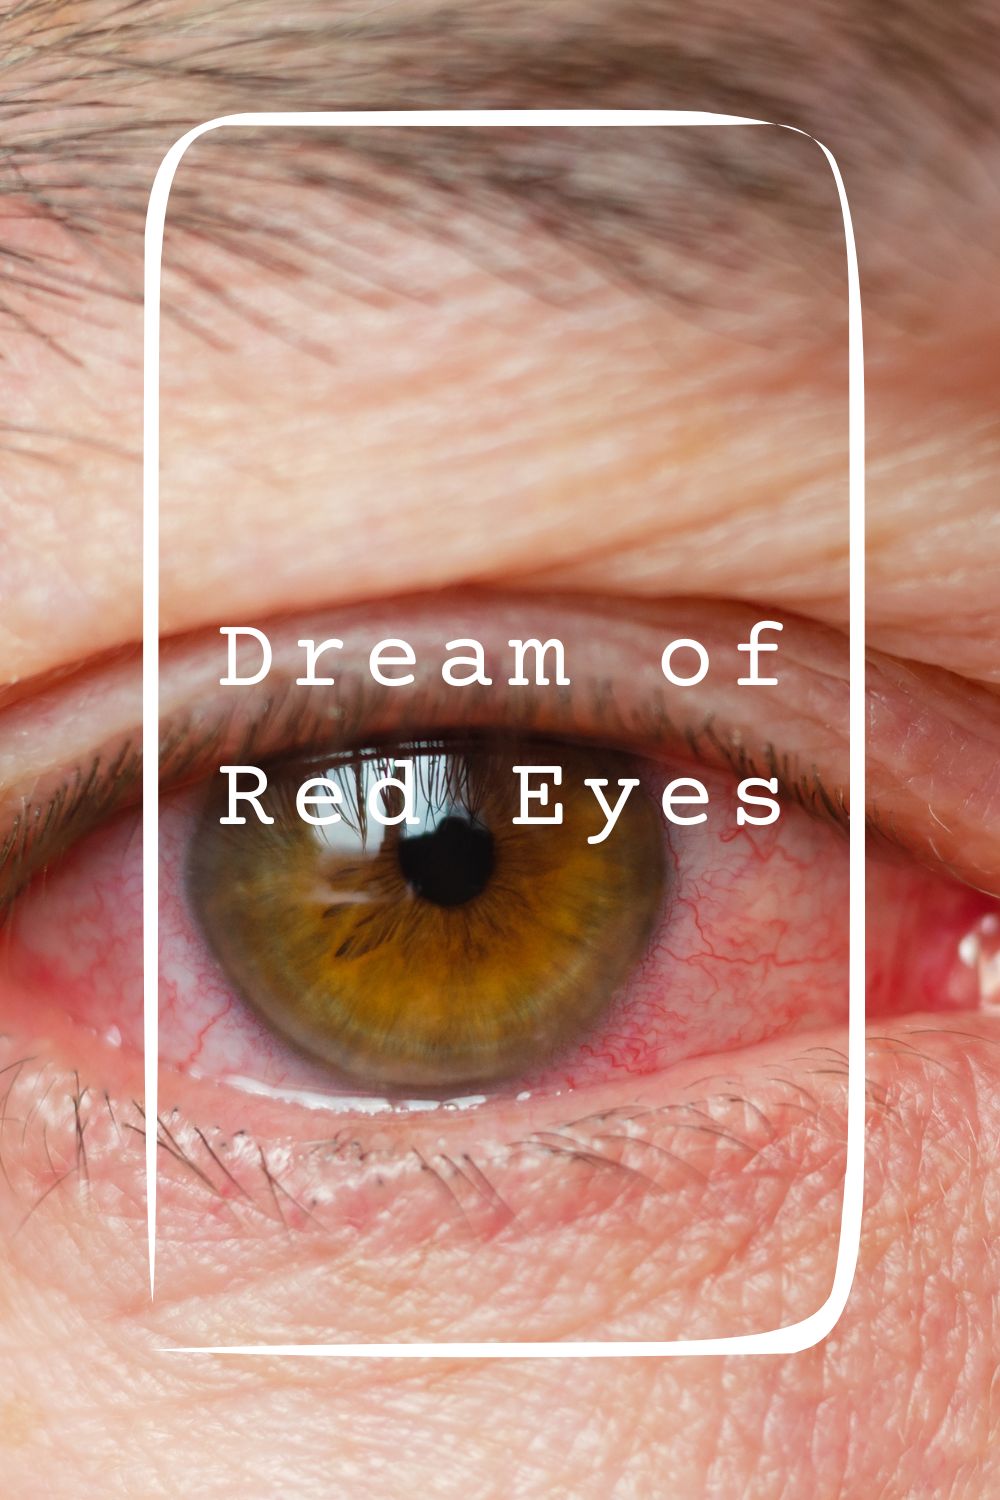 15 Dream of Red Eyes Meanings4